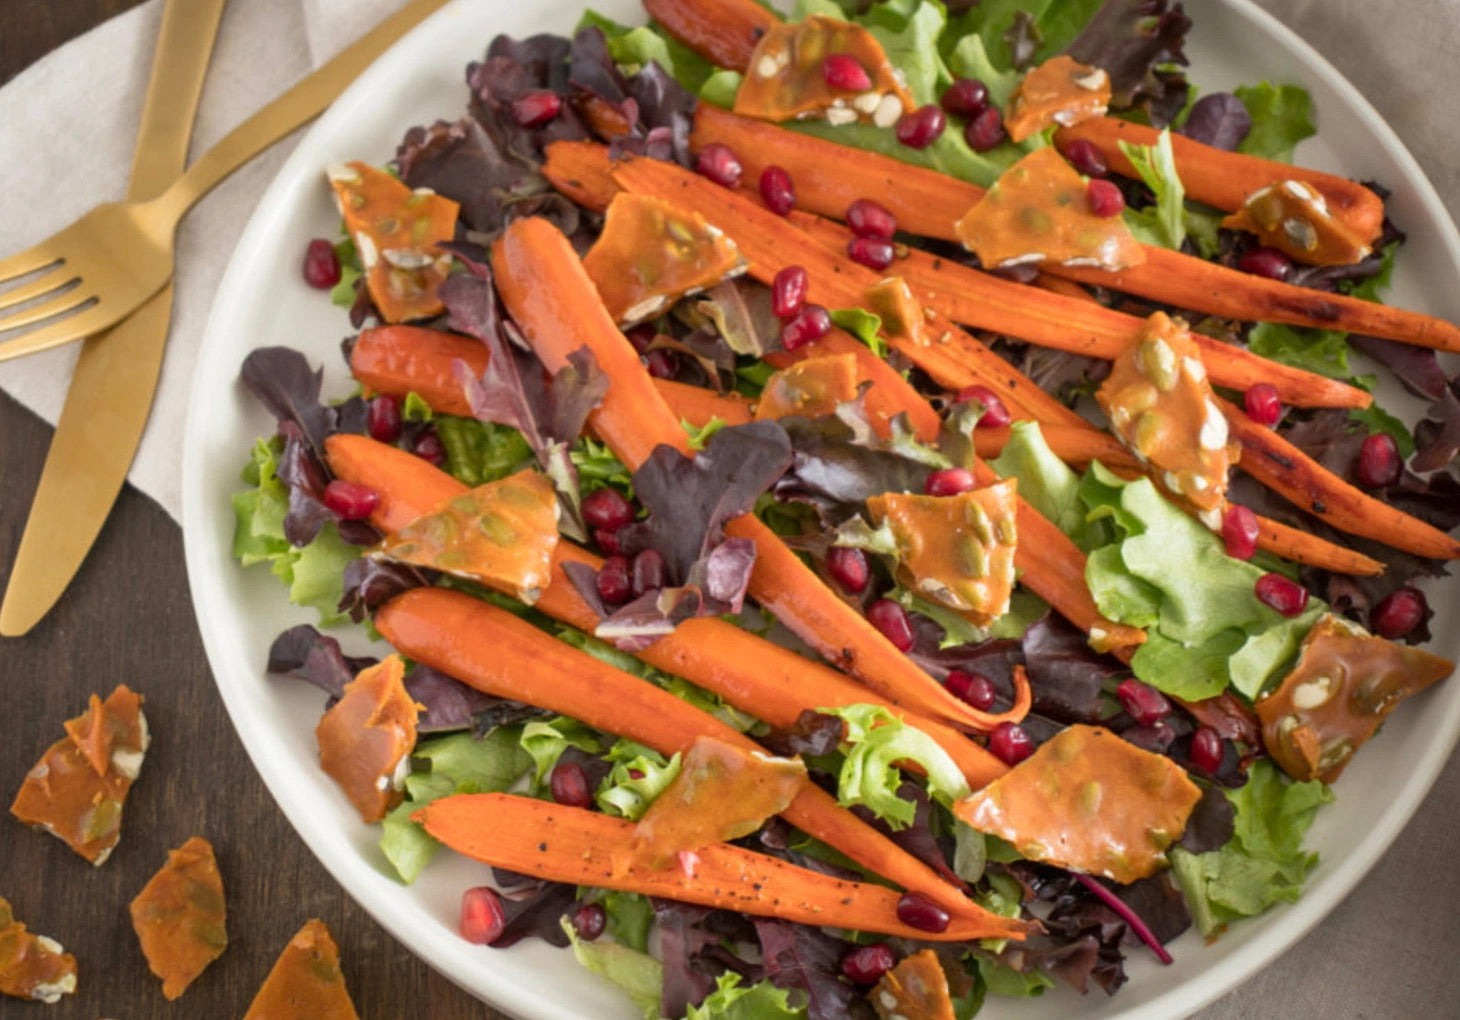 Herb and Citrus Roasted Carrot Salad